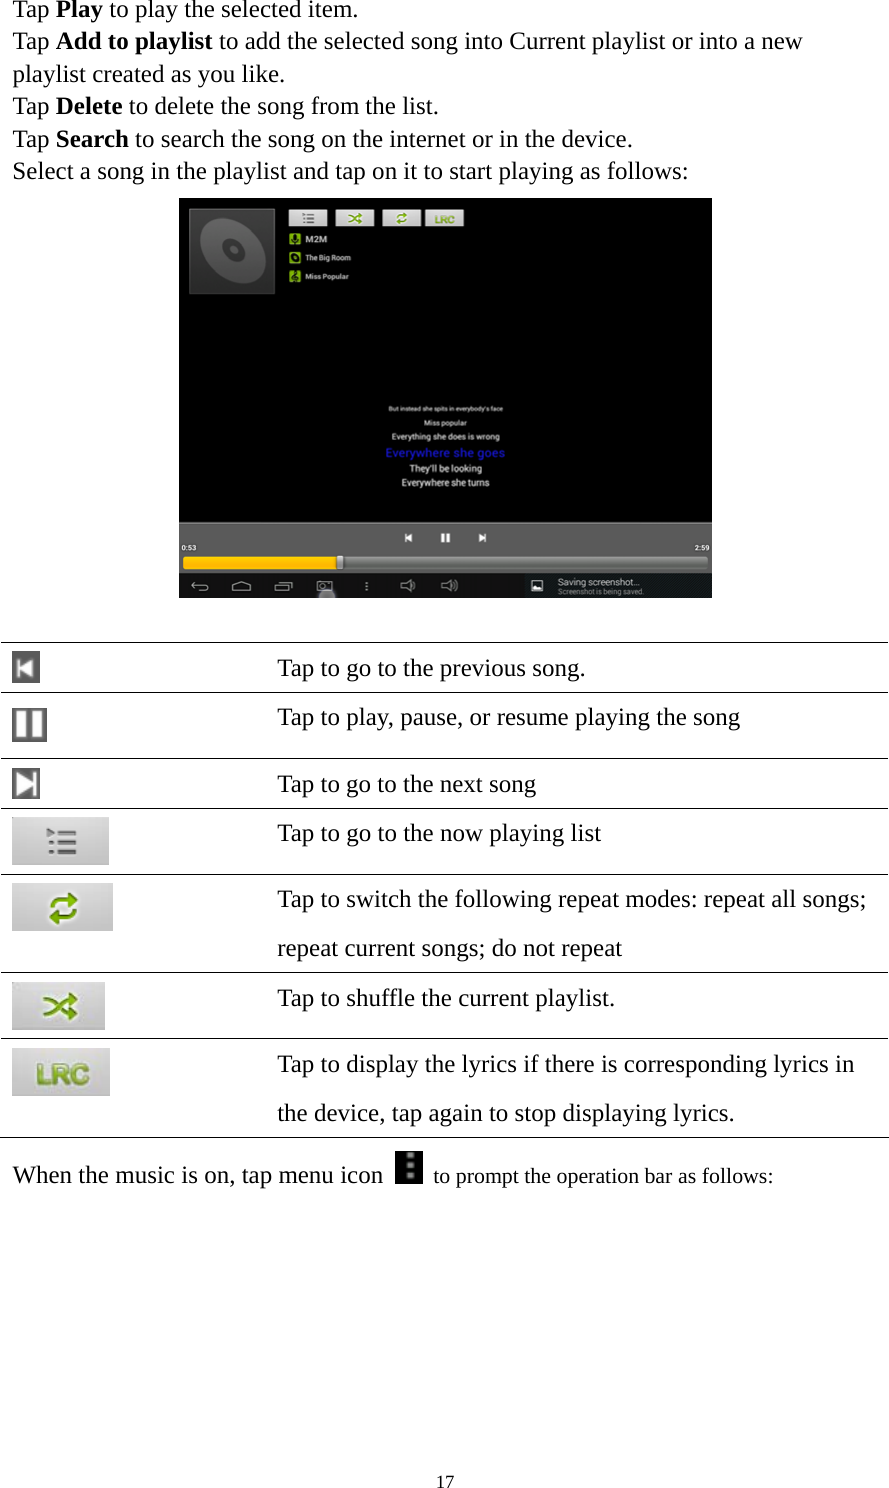 17 Tap Play to play the selected item. Tap Add to playlist to add the selected song into Current playlist or into a new playlist created as you like. Tap Delete to delete the song from the list. Tap Search to search the song on the internet or in the device.   Select a song in the playlist and tap on it to start playing as follows:      Tap to go to the previous song.  Tap to play, pause, or resume playing the song  Tap to go to the next song  Tap to go to the now playing list  Tap to switch the following repeat modes: repeat all songs;   repeat current songs; do not repeat  Tap to shuffle the current playlist.  Tap to display the lyrics if there is corresponding lyrics in the device, tap again to stop displaying lyrics.   When the music is on, tap menu icon    to prompt the operation bar as follows:   